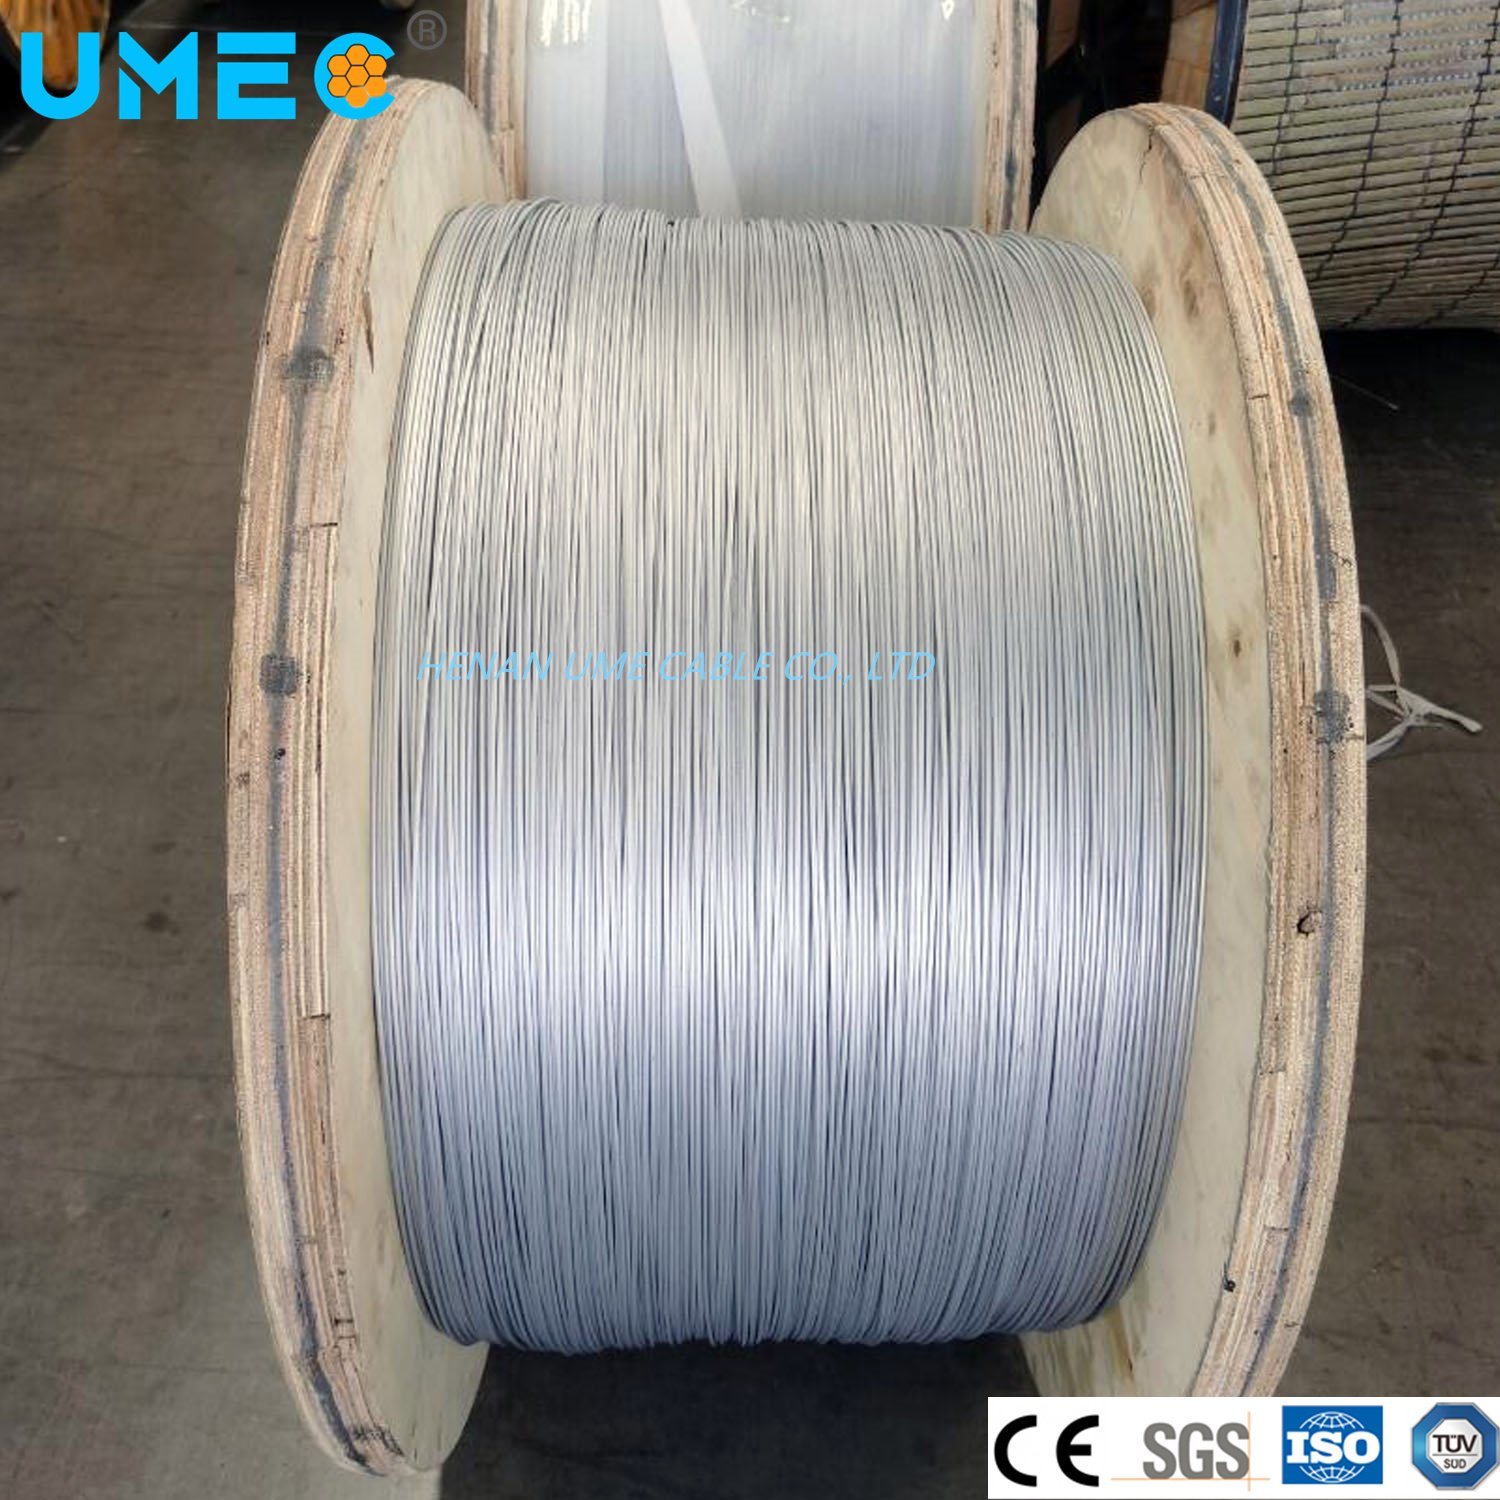 IEC61232 ASTM B-502 Standard Aluminum Clad Steel Overhead Grounding Wire Acs Single or Stranded Wire